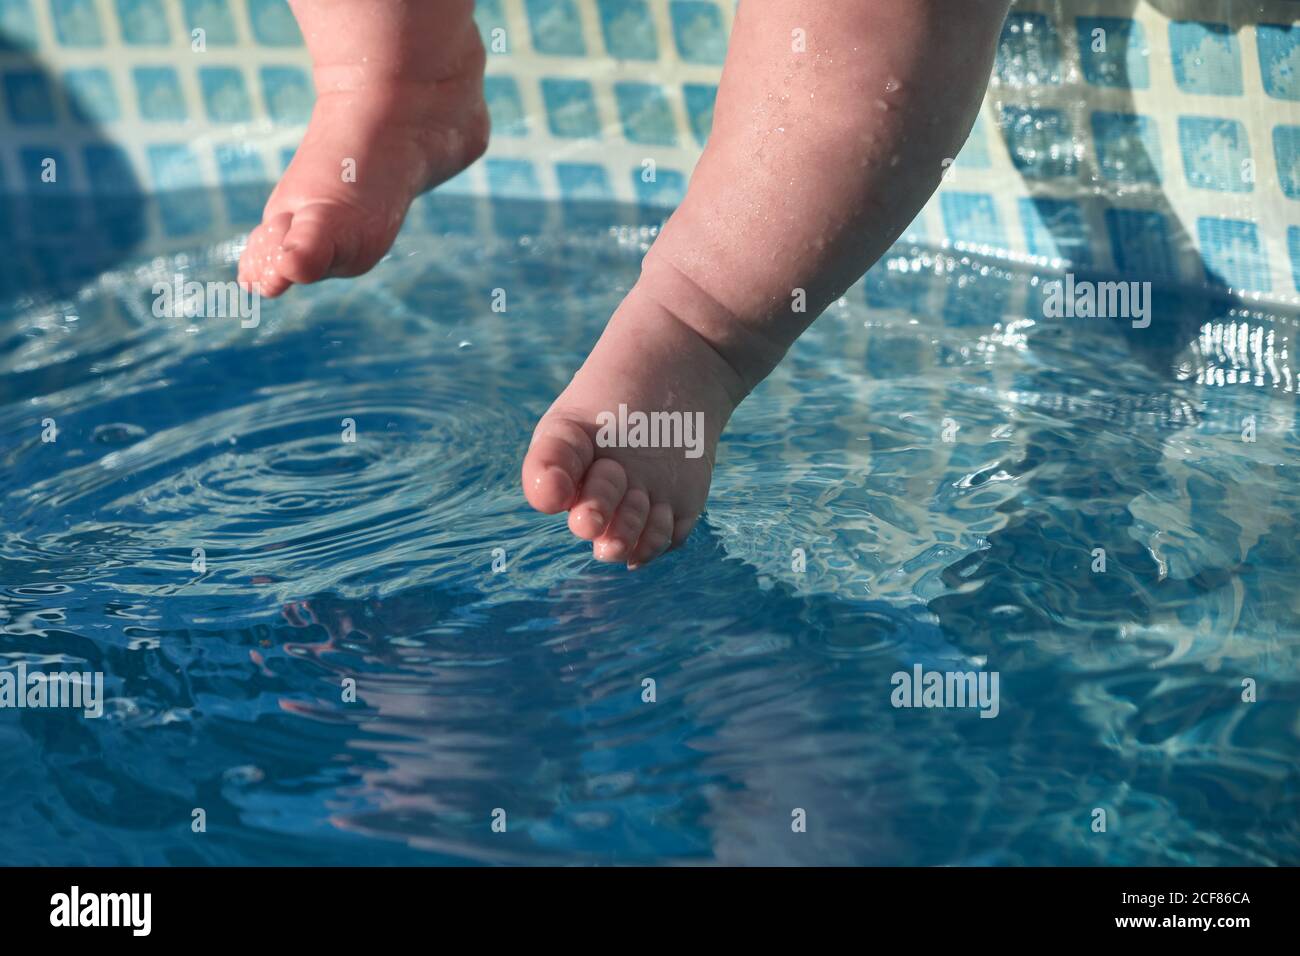 Baby's feet touch the blue water in the pool. Concept of newborn swimming training. Stock Photo